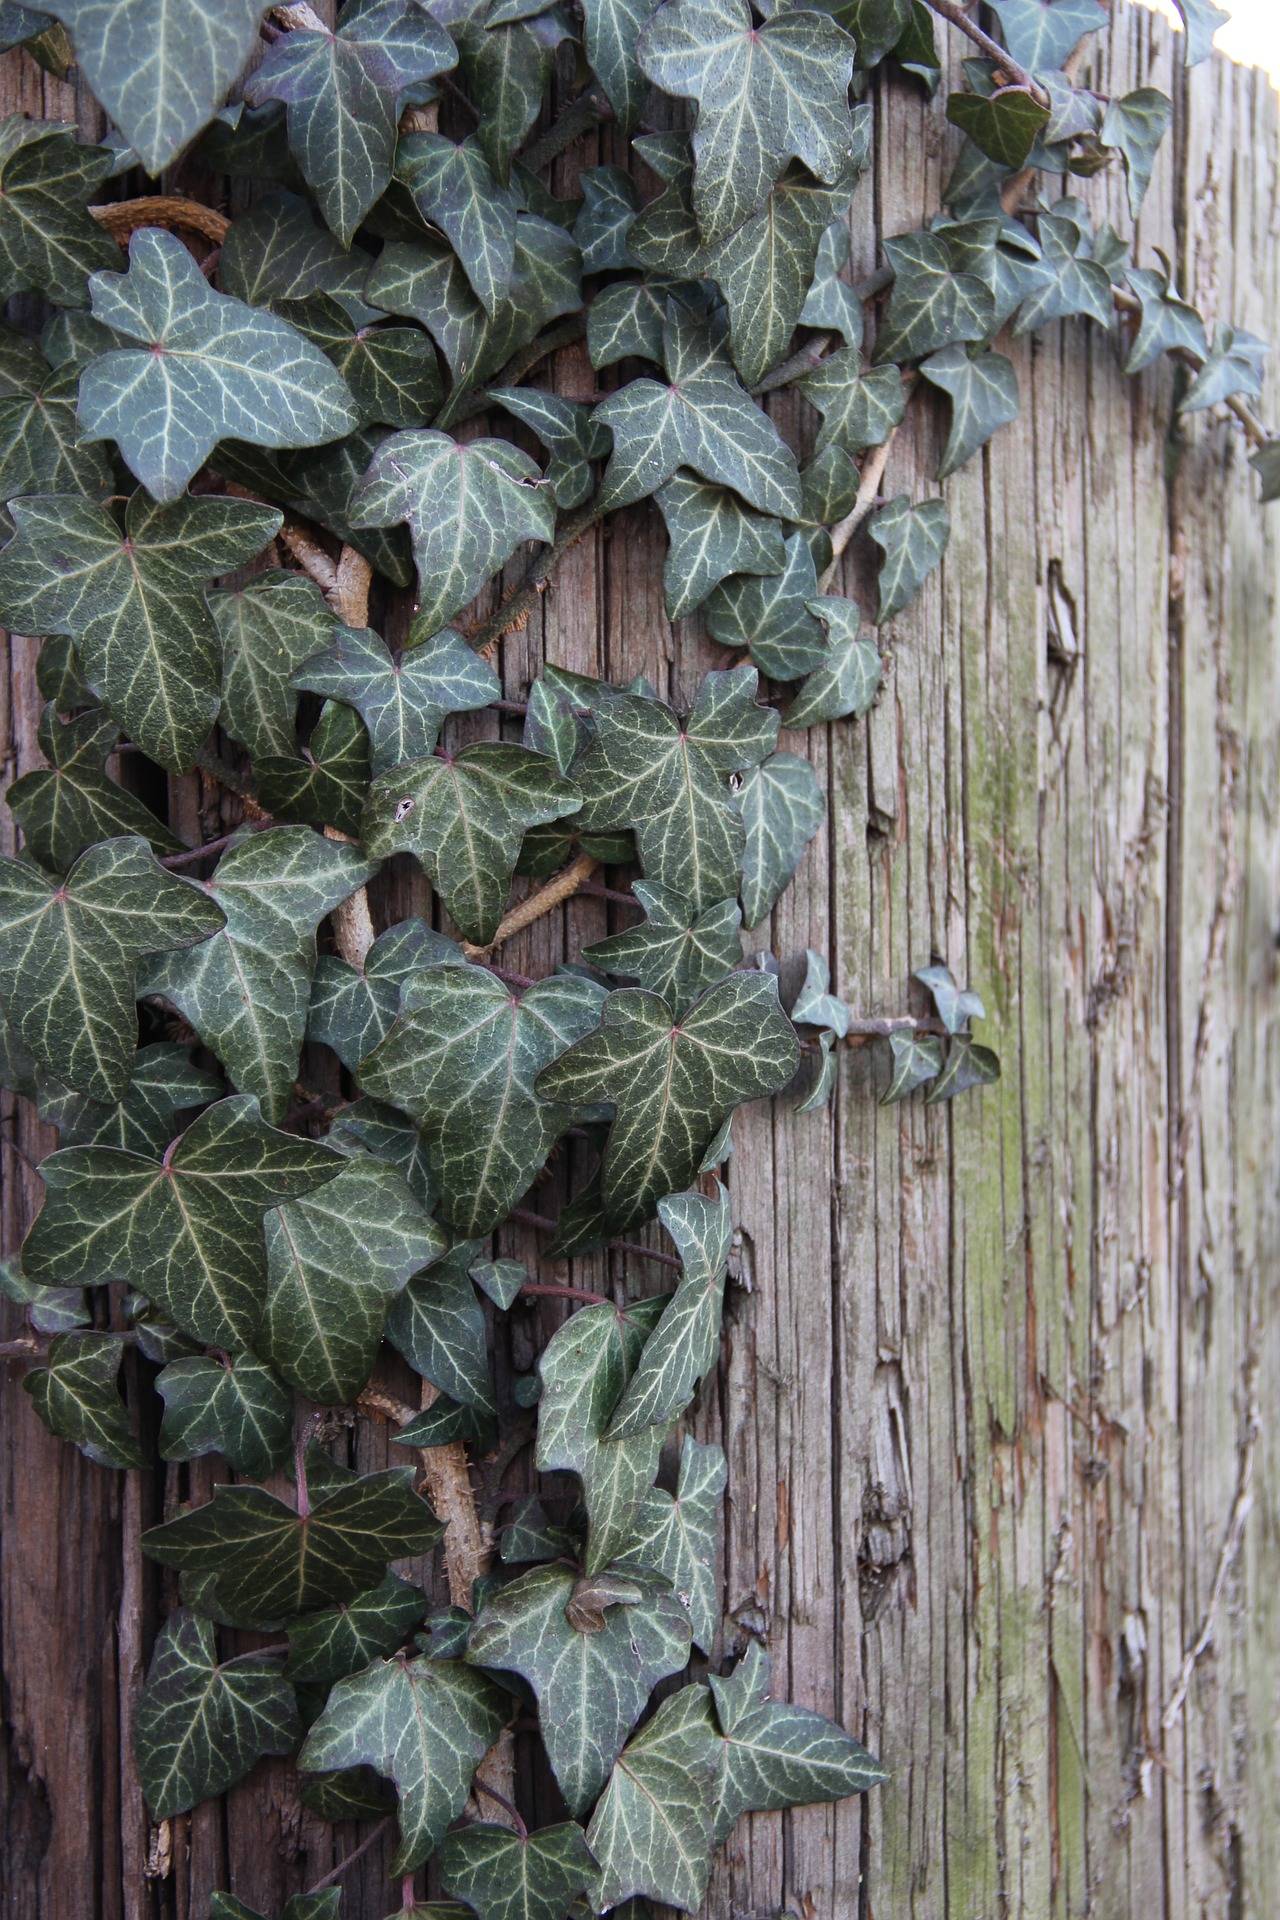 Watch out for noxious weed, English ivy